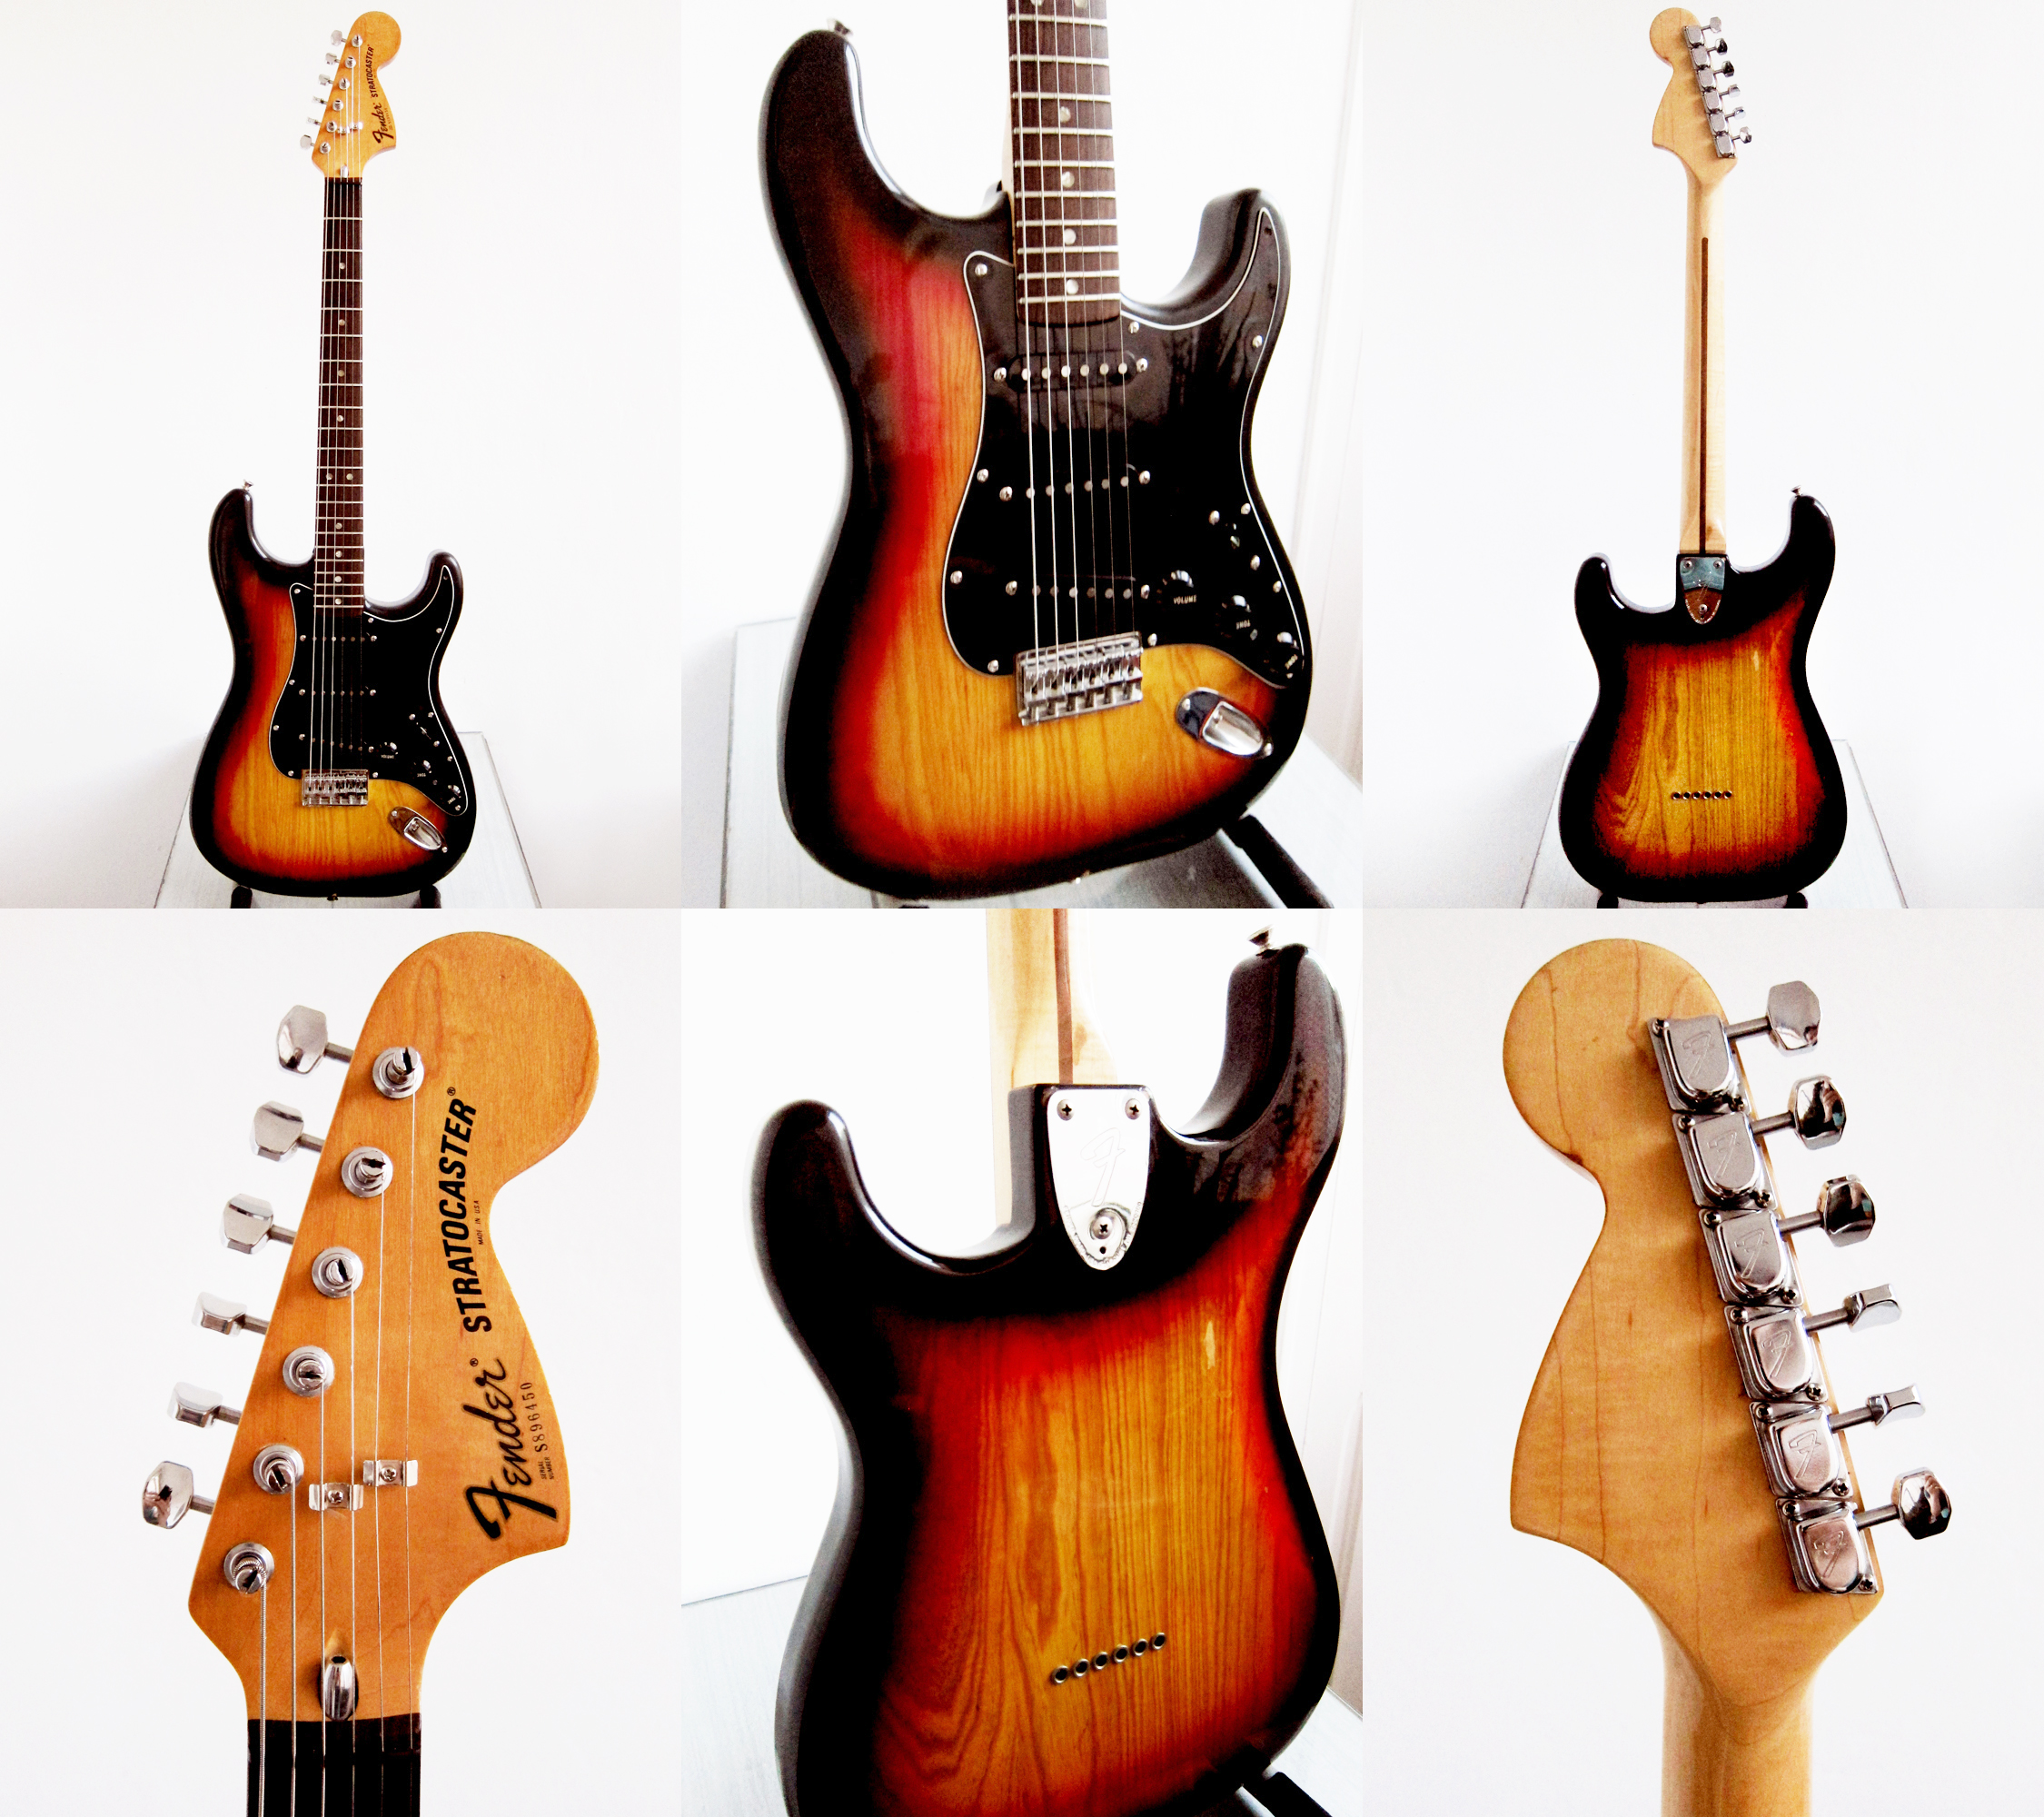 Fender Stratocaster, made at the Fullerton plant in 1979 